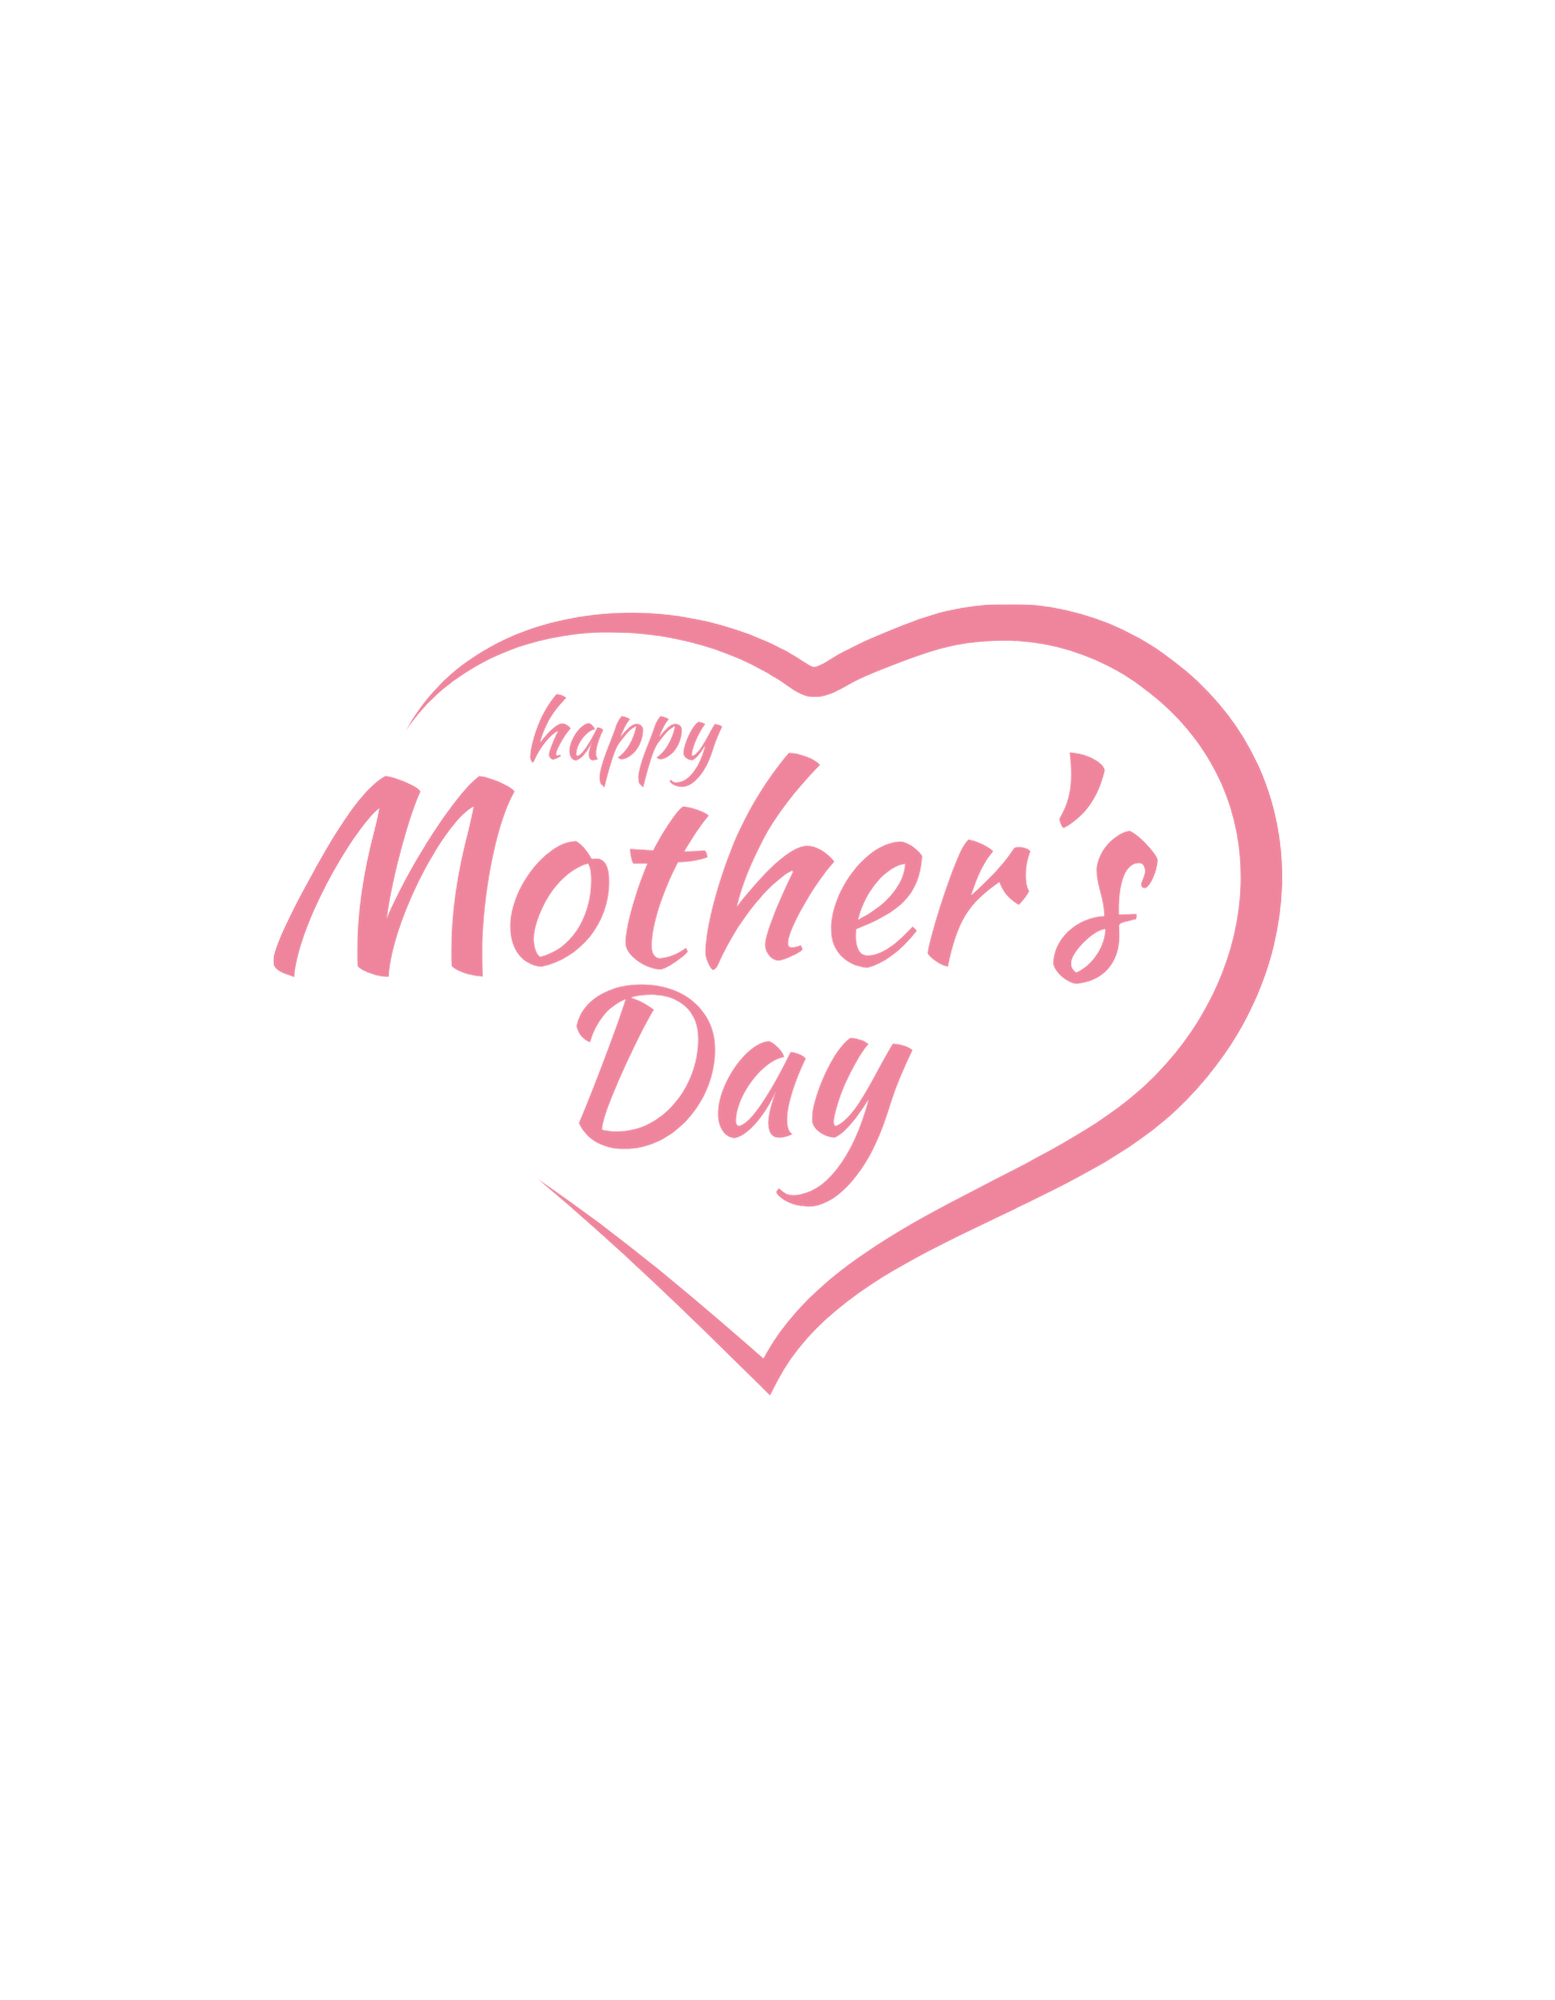 mother day design 1 491